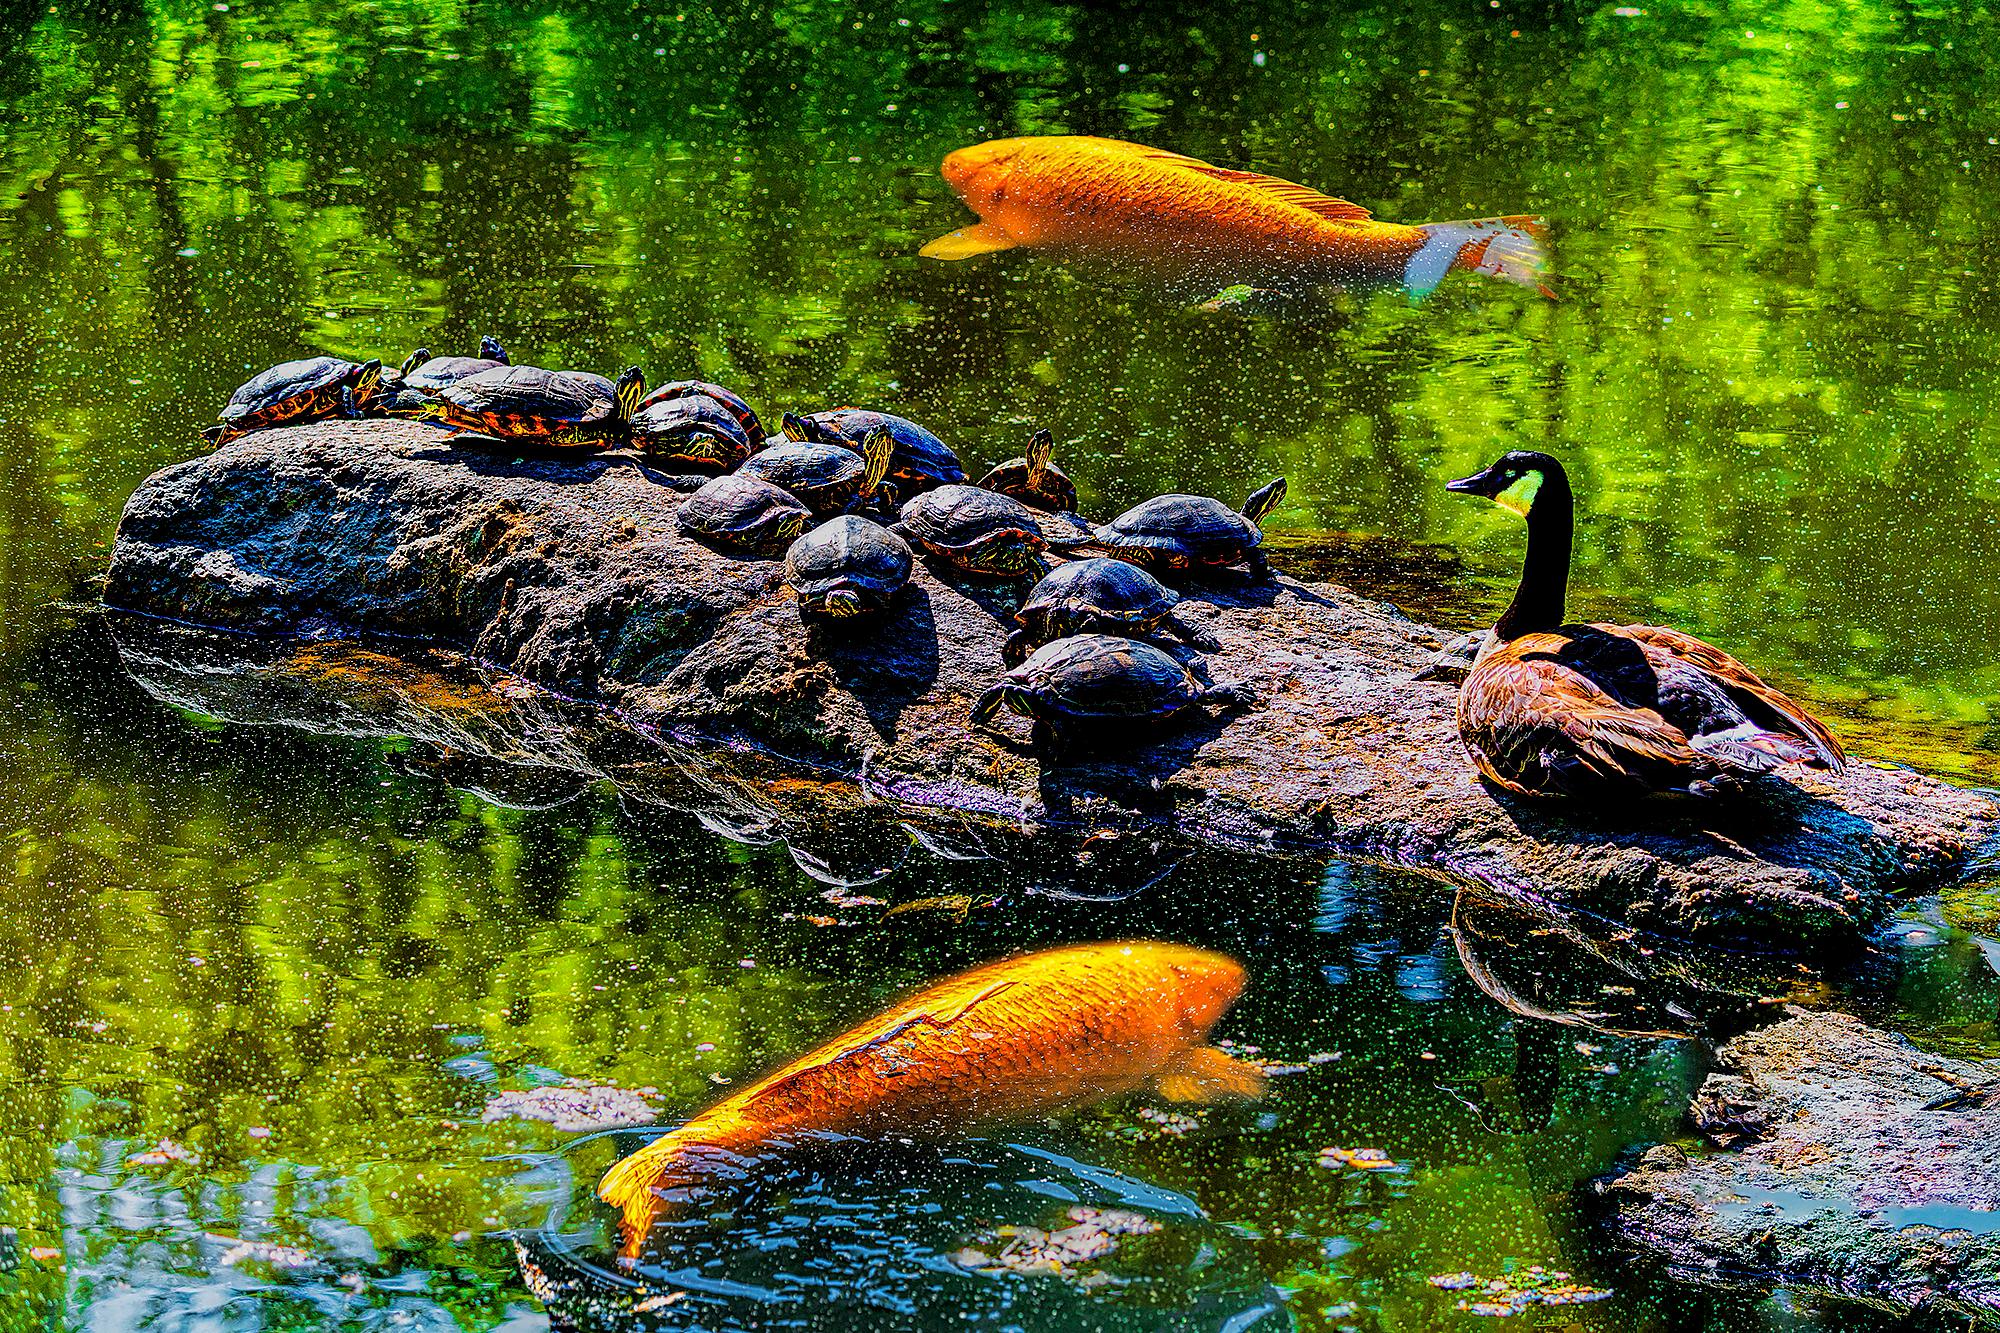 Mitchell Funk Color Photograph - Duck, Turtles and Gold Fish in Central Park Pond Basking in Sun